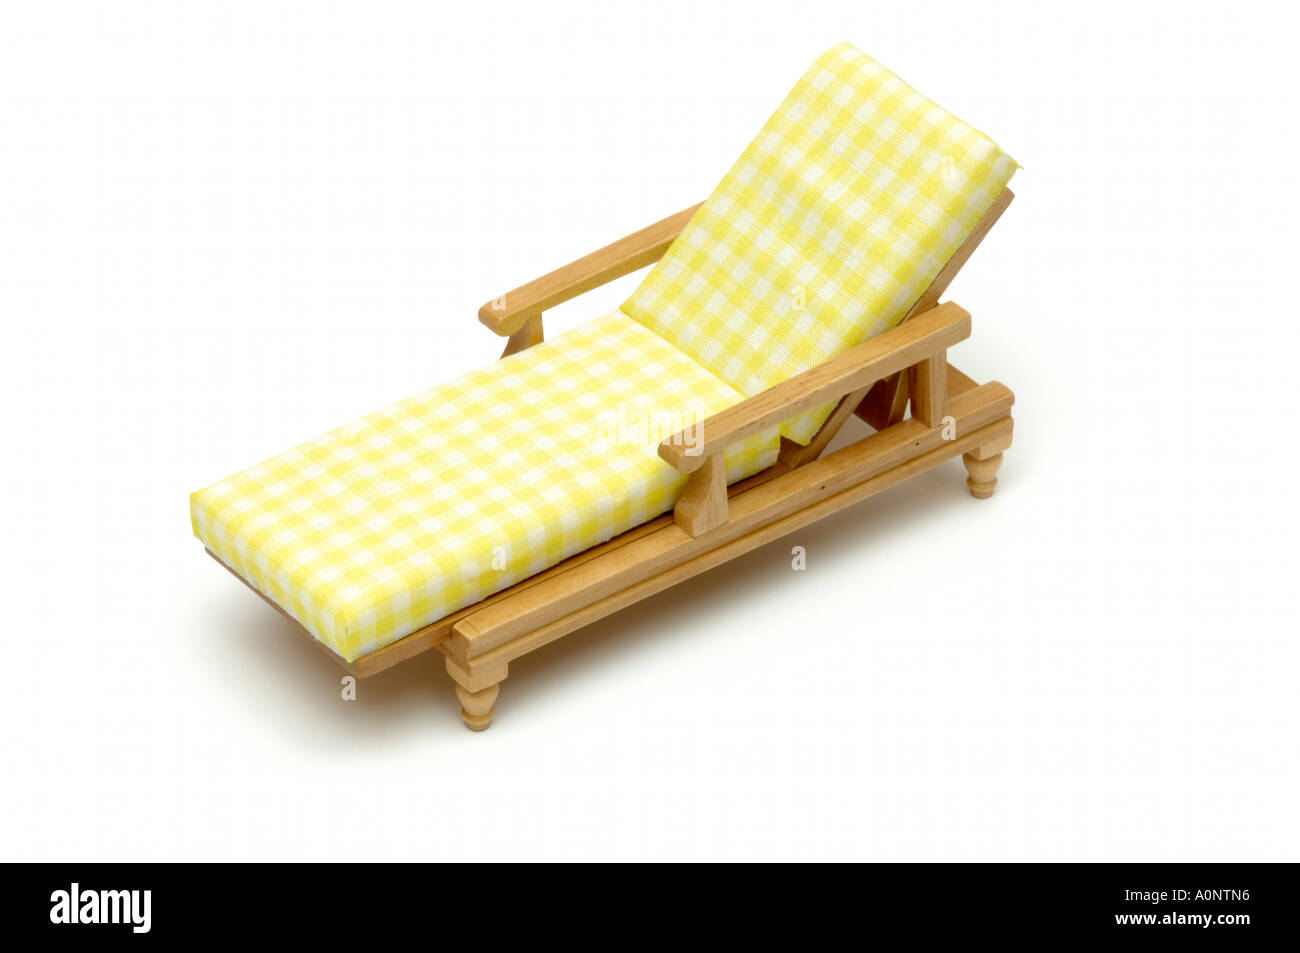 Oriental sun bathing lounge wooden chair on white background Stock Photo